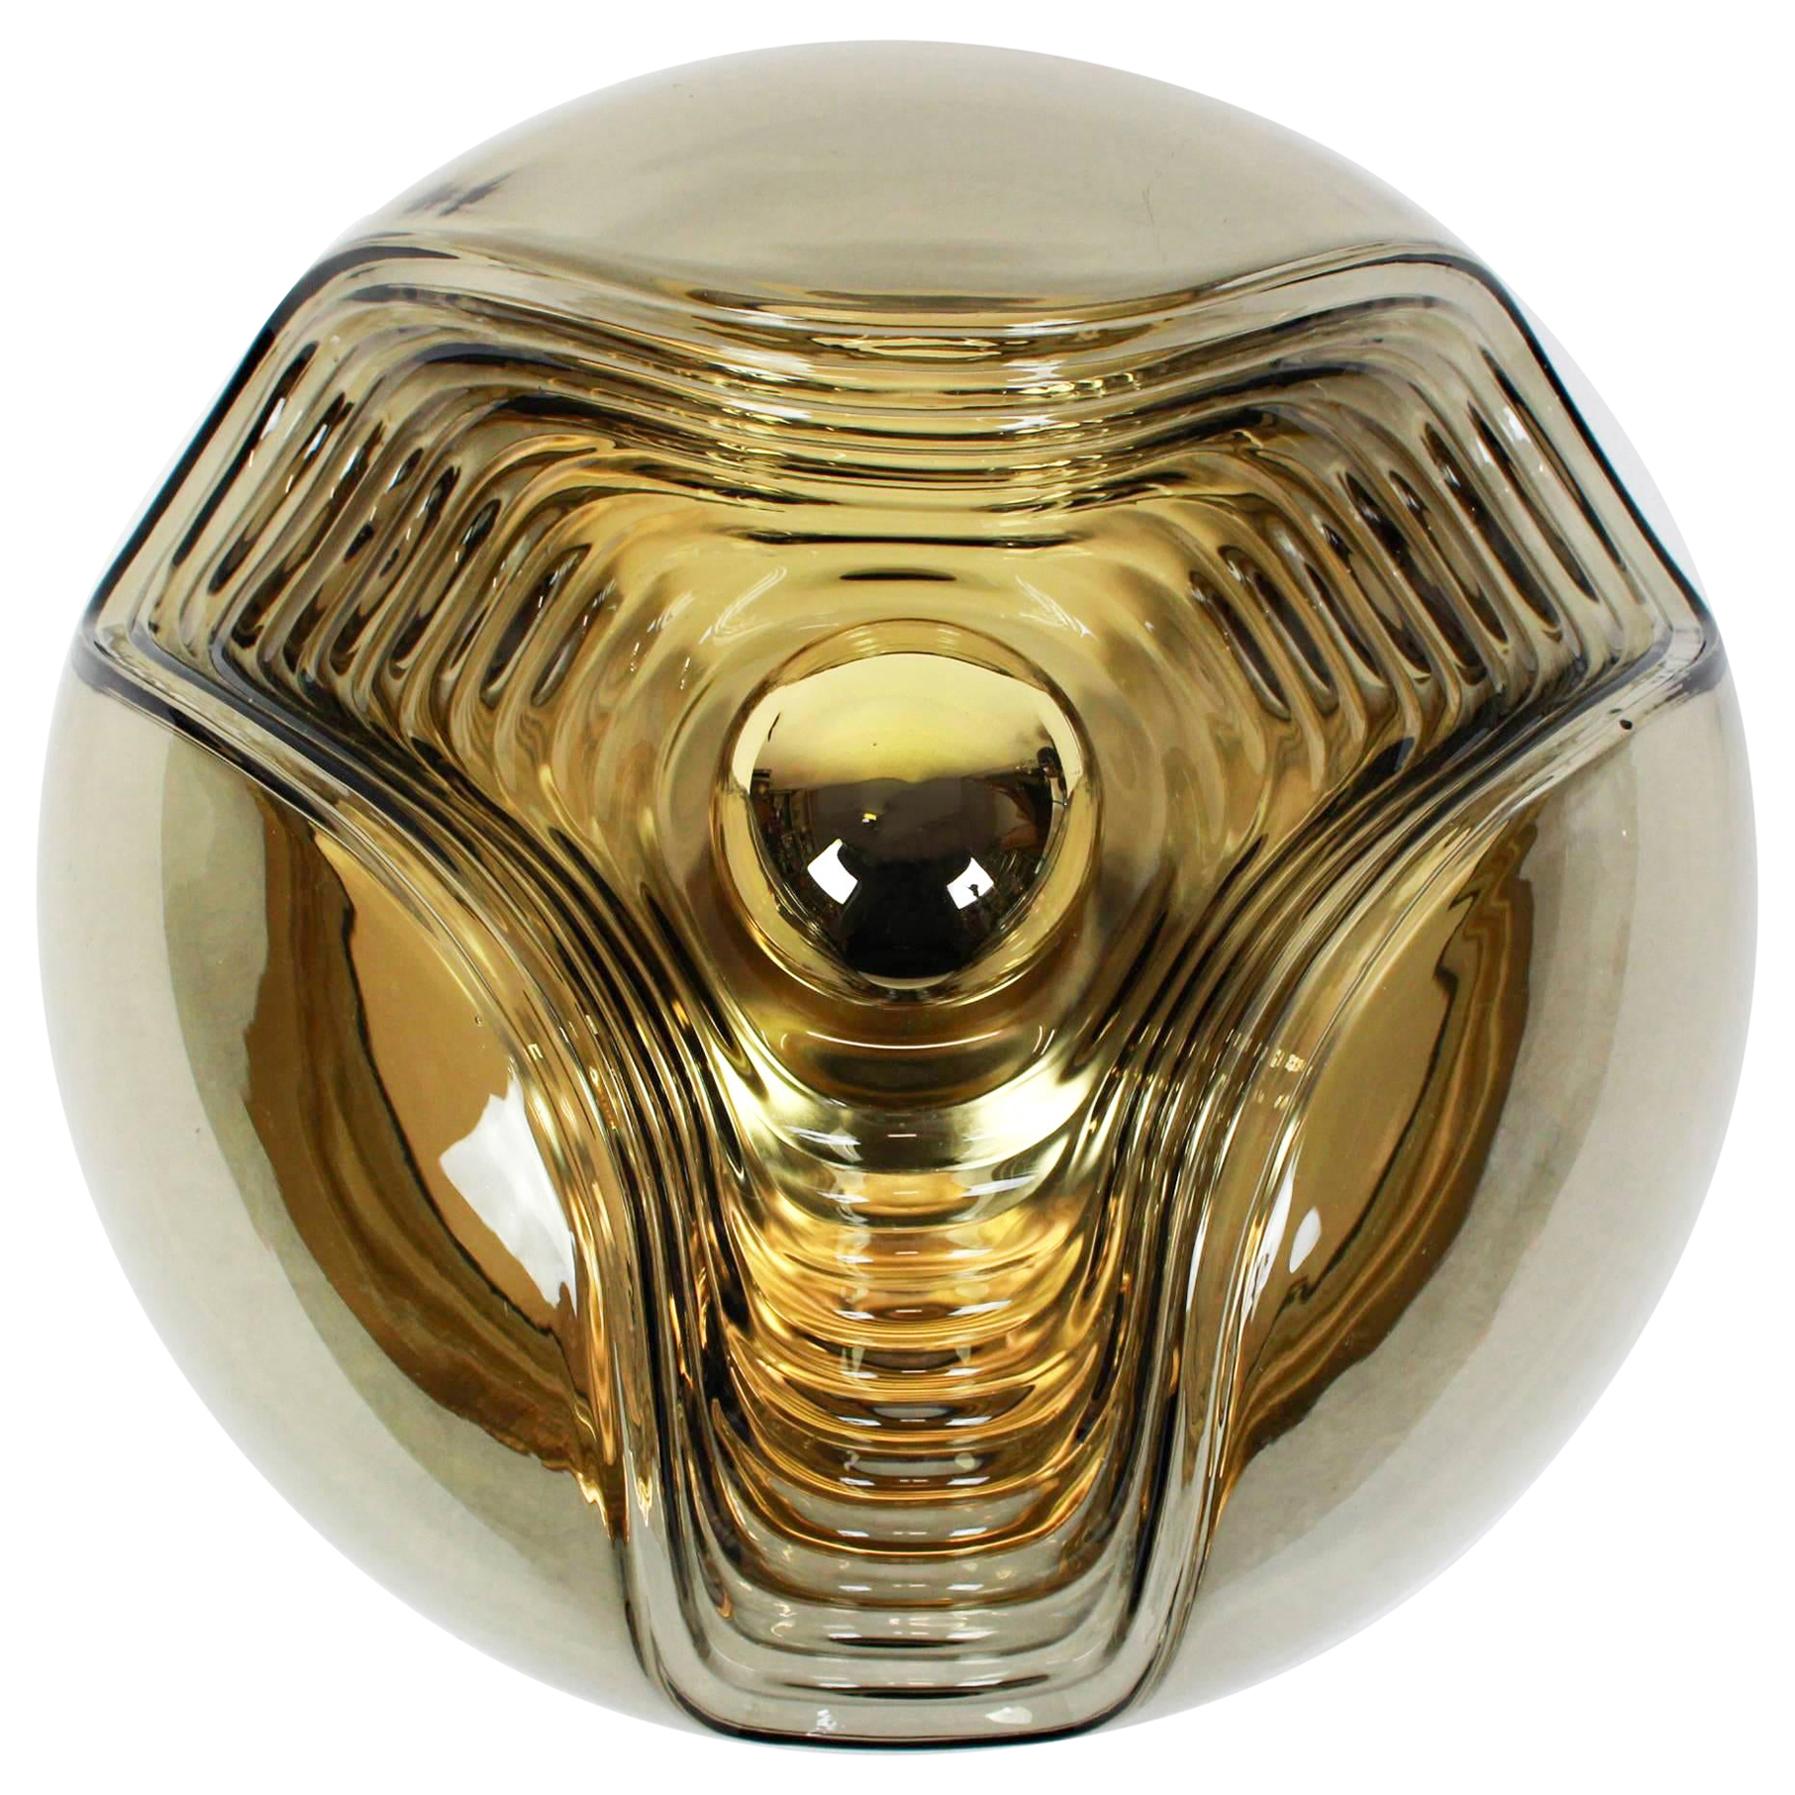 A special round biomorphic smoked glass wall sconce or flush mount designed by Koch & Lowy for Peill & Putzler, manufactured in Germany, circa 1970s.

High quality and in very good condition. Cleaned, well-wired and ready to use. 

Each fixture